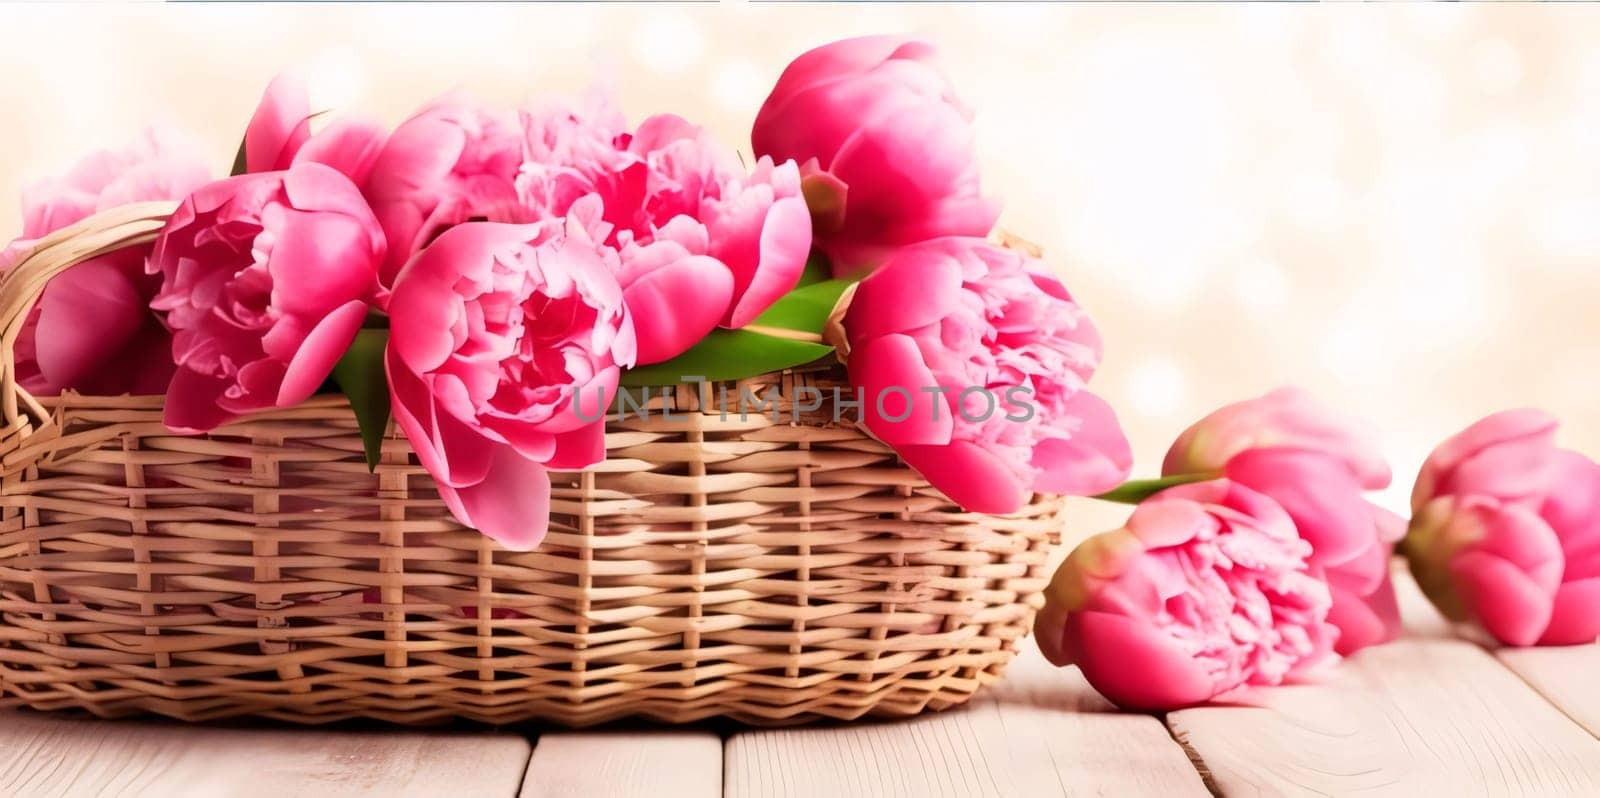 Mother's Day: Bouquet of pink tulips in a basket on a wooden background